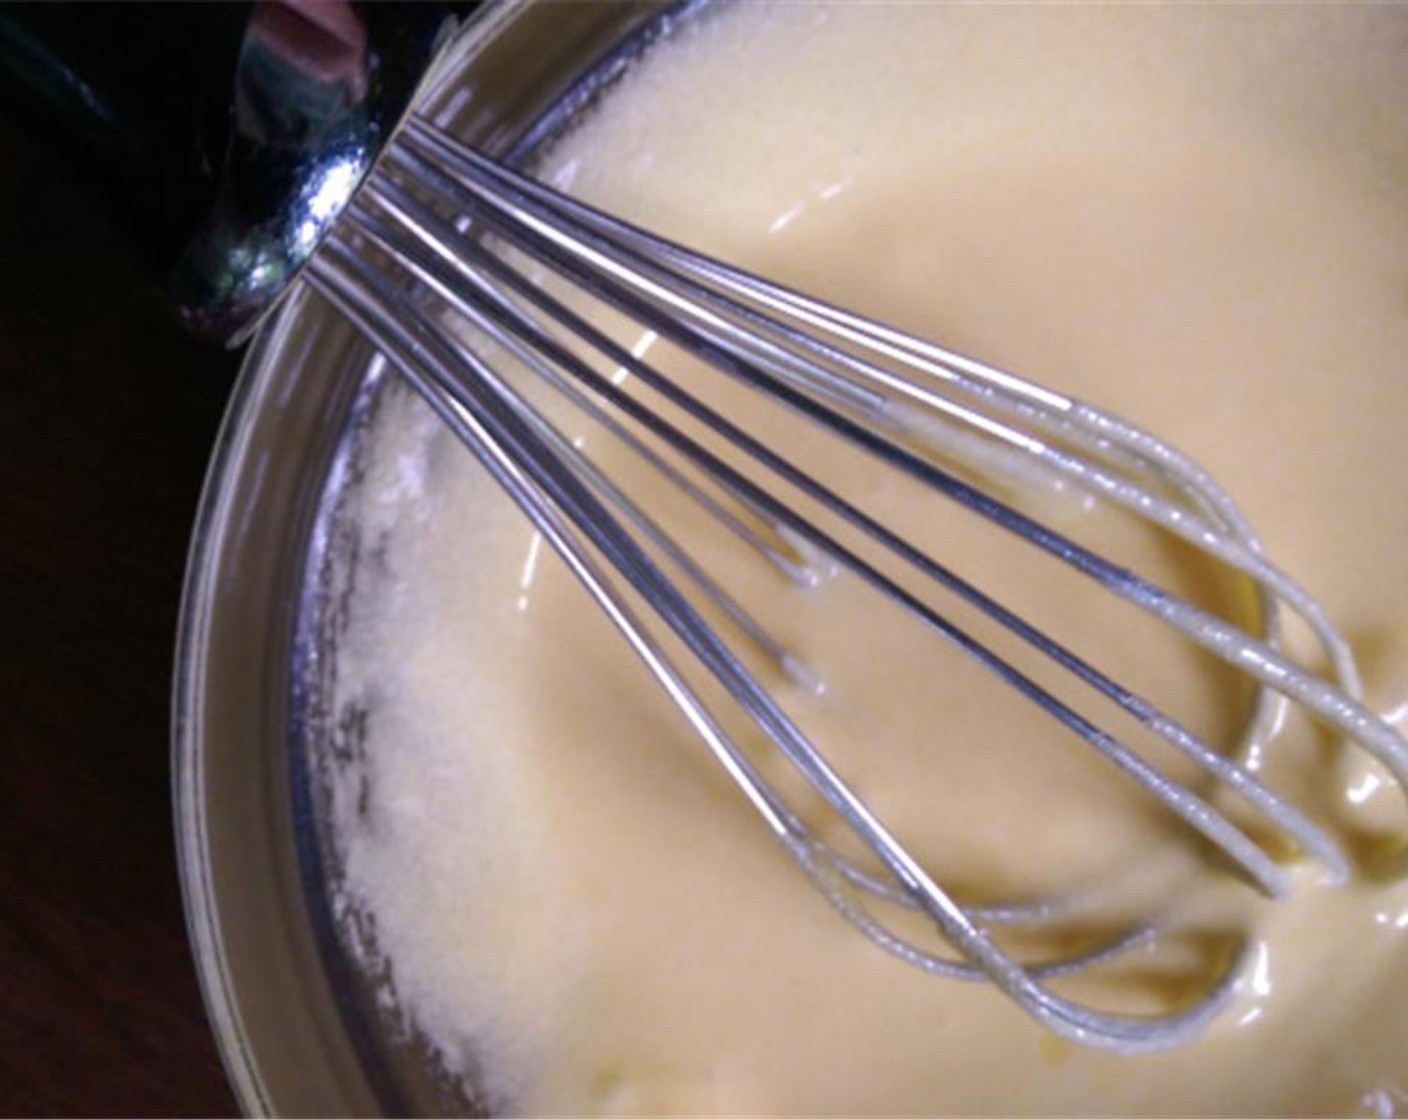 step 2 In a bowl, whisk Eggs (4) with Granulated Sugar (3/4 cup) and Salt (1 pinch) until they are fluffy and pale yellow in color.